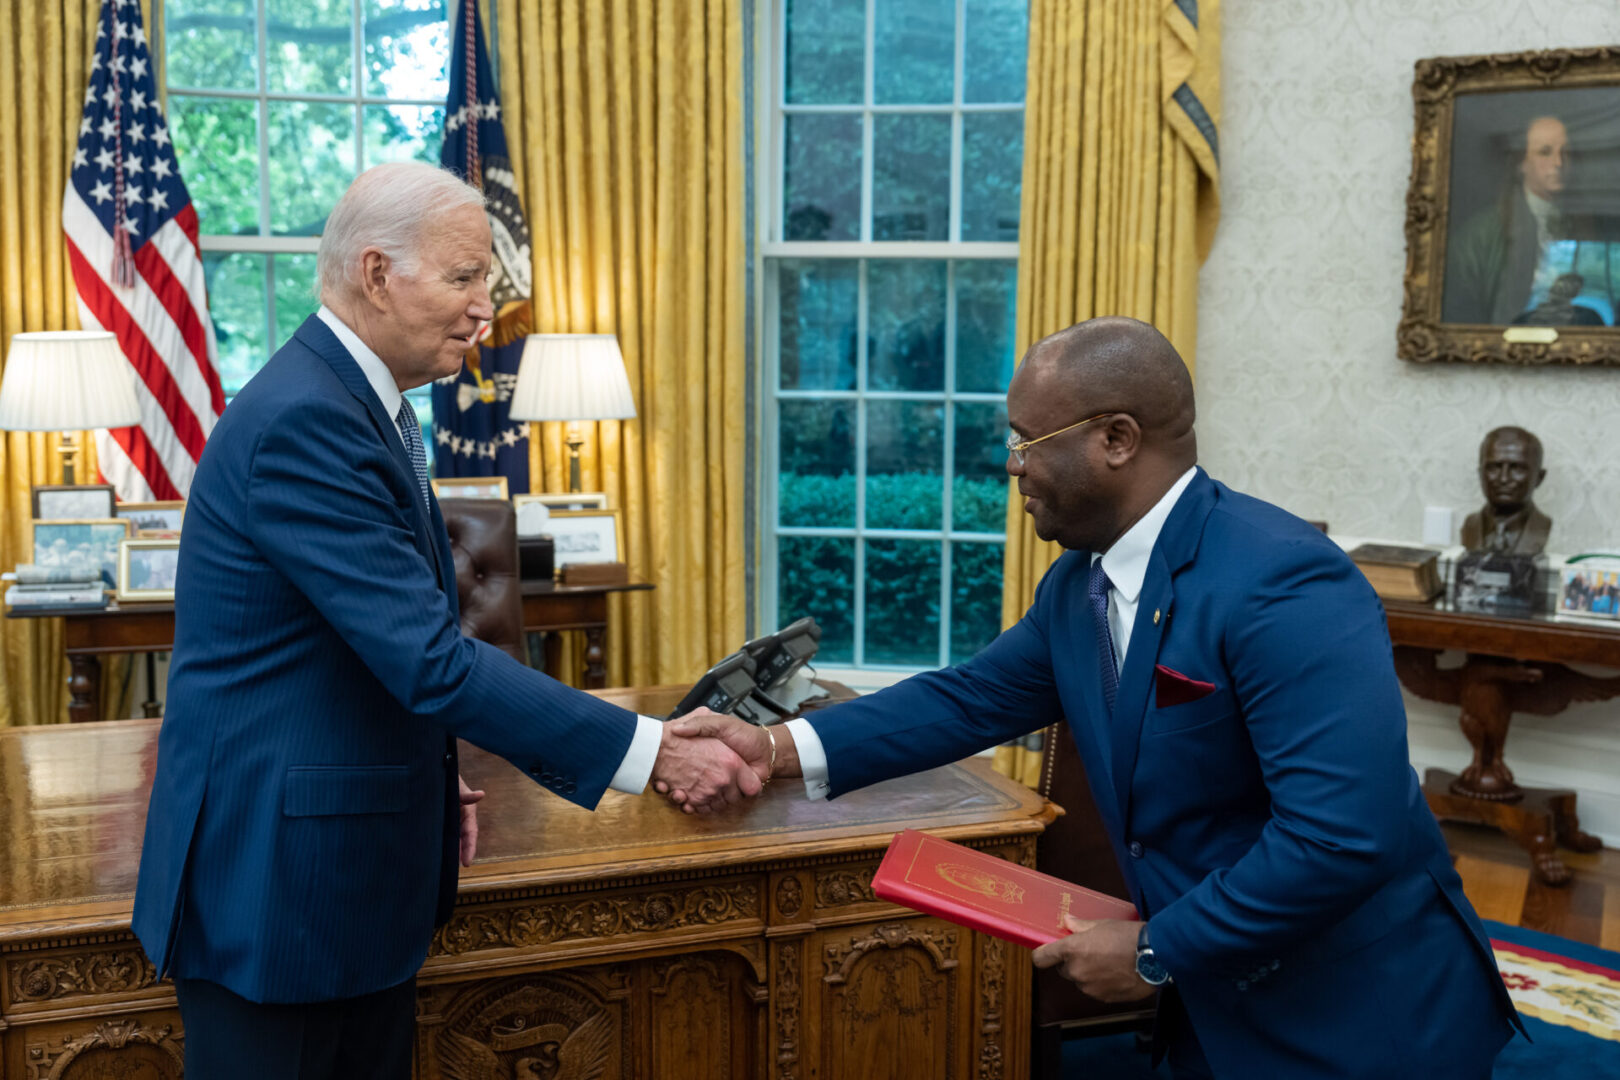 President Joe Biden participates in a photo line during an ambassador credentialing ceremony, Friday, June 30, 2023, in the Oval Office of the White House. (Official White House Photo by Adam Schultz)